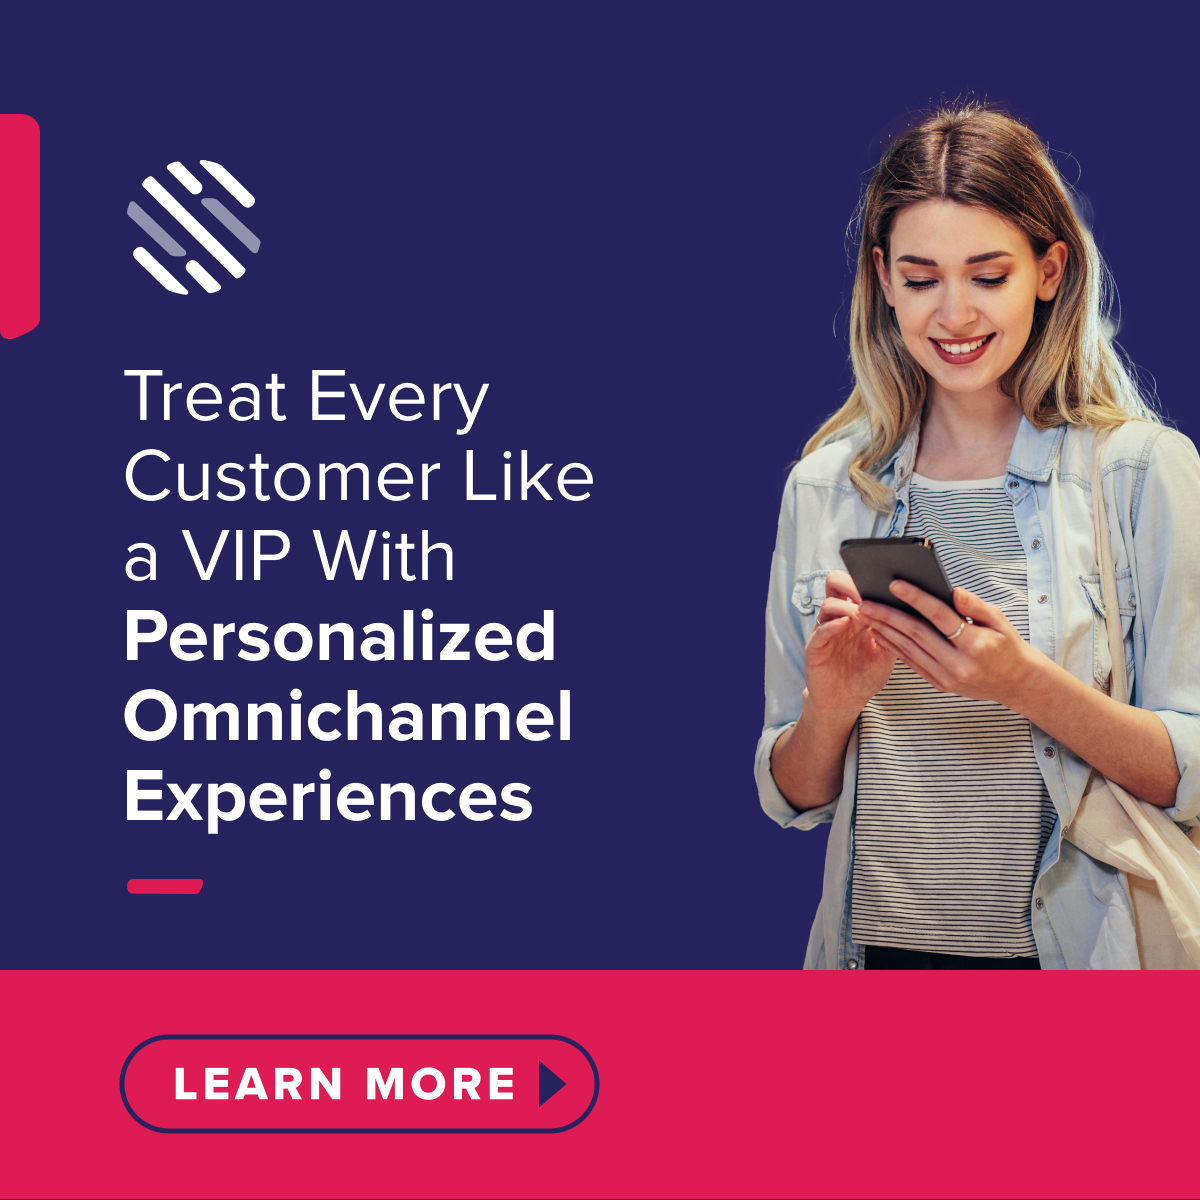 Learn how to unlock actionable intelligence from your data to provide personalized experiences that drive loyalty and maximize lifetime value. bit.ly/4duien7 #SutherlandRetail #Retail #OmnichannelRetail #CX #SutherlandCXM